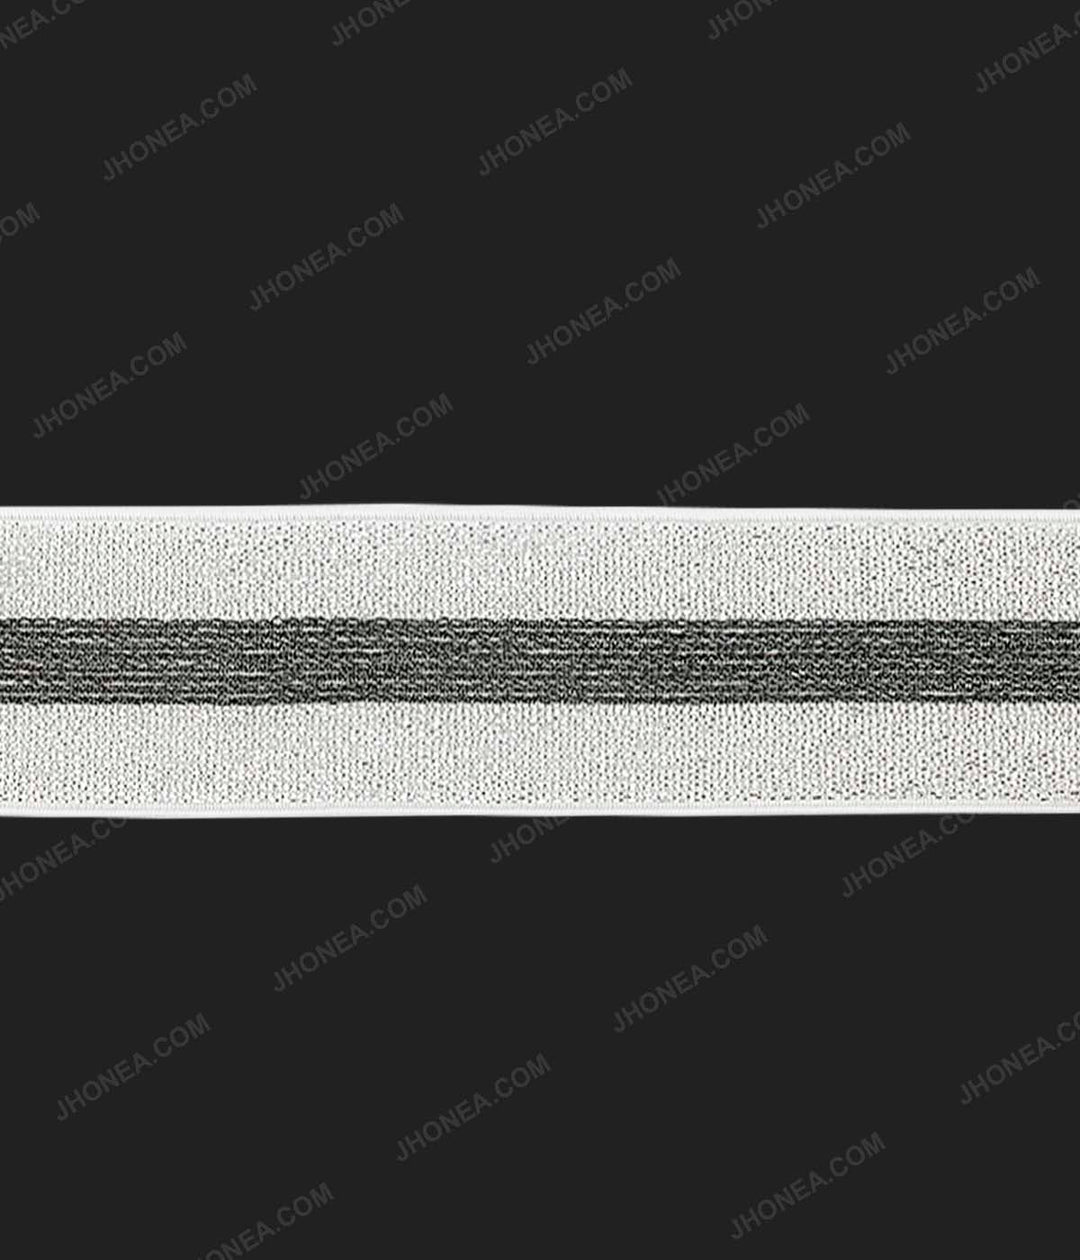 Shiny Metallic 1.5inch wide Fancy Lurex Knit Elastic for Party Wear in White with Black Color 